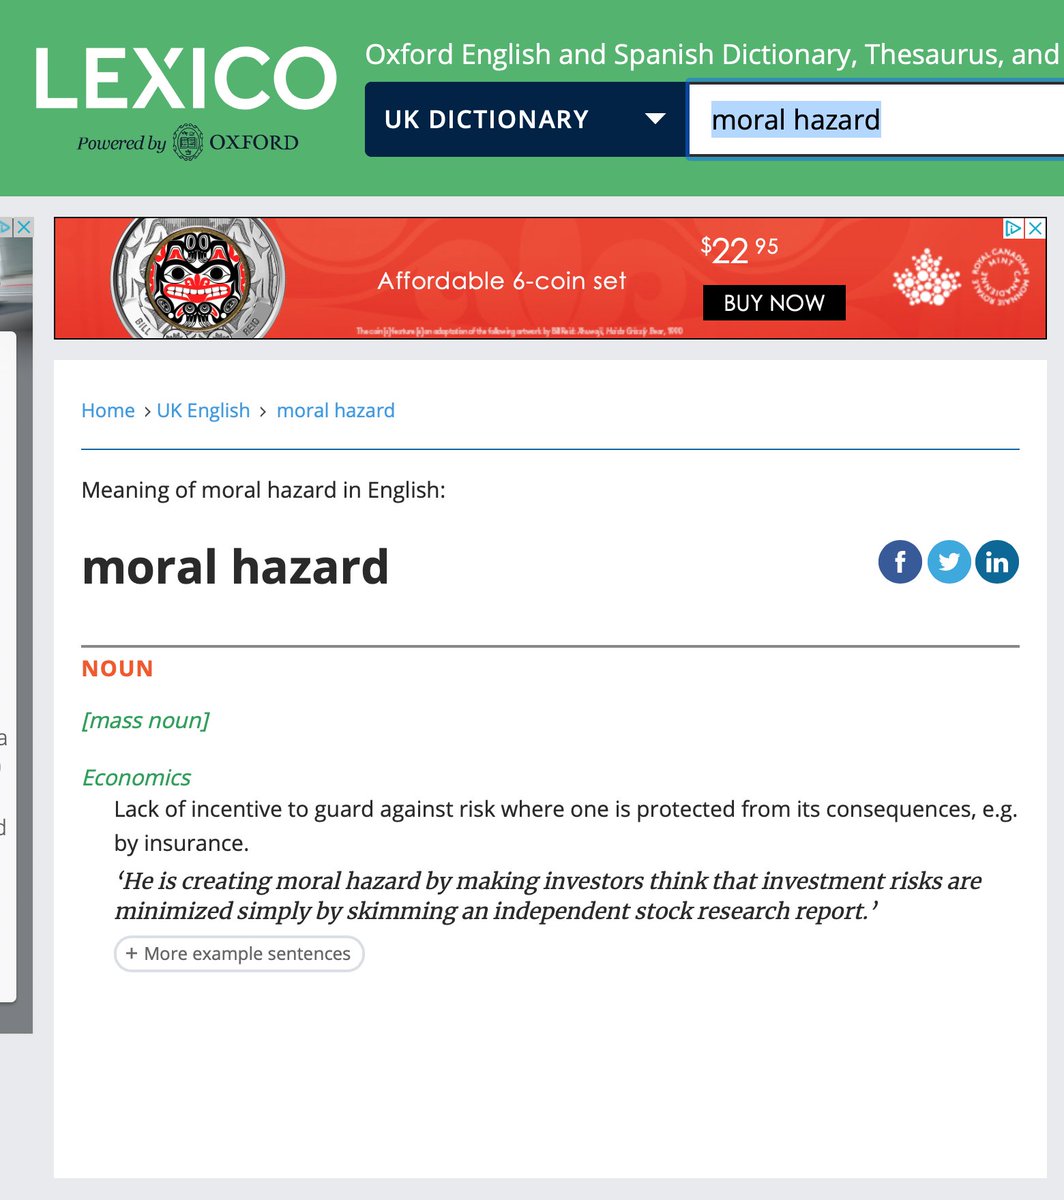  http://Lexico.com  gives us the following definition of "Moral Hazard":  https://www.lexico.com/definition/moral_hazard/4